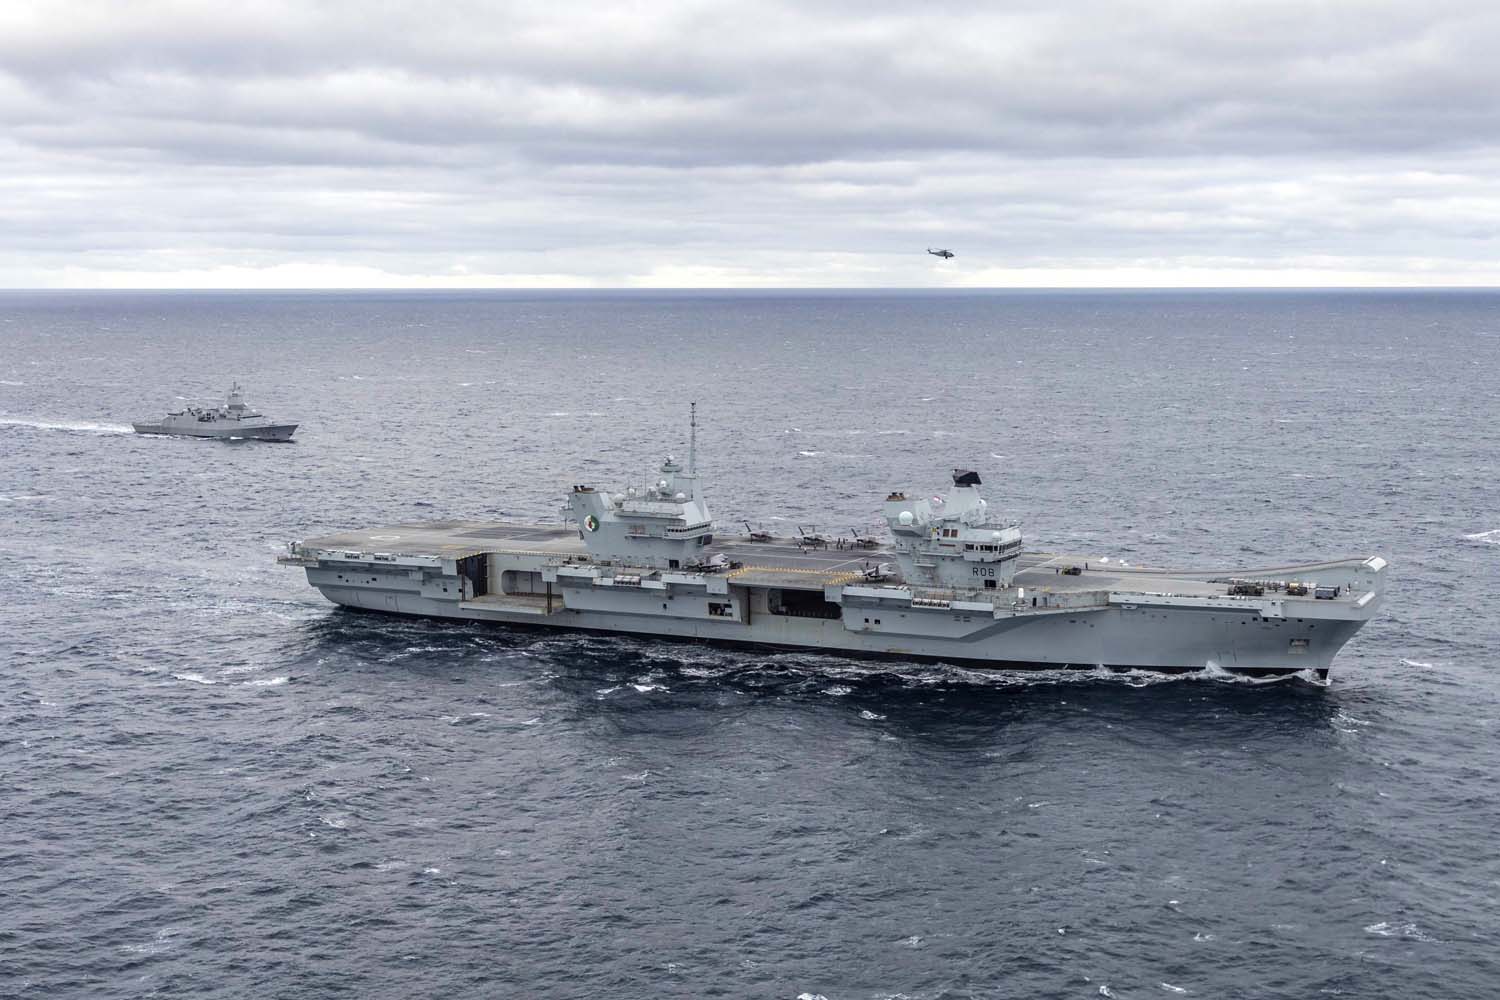 The British aircraft carrier HMS Queen Elizabeth, carrying fifth-generation F-35B Lightning II fighters, has transferred to NATO command for the first time in history-15